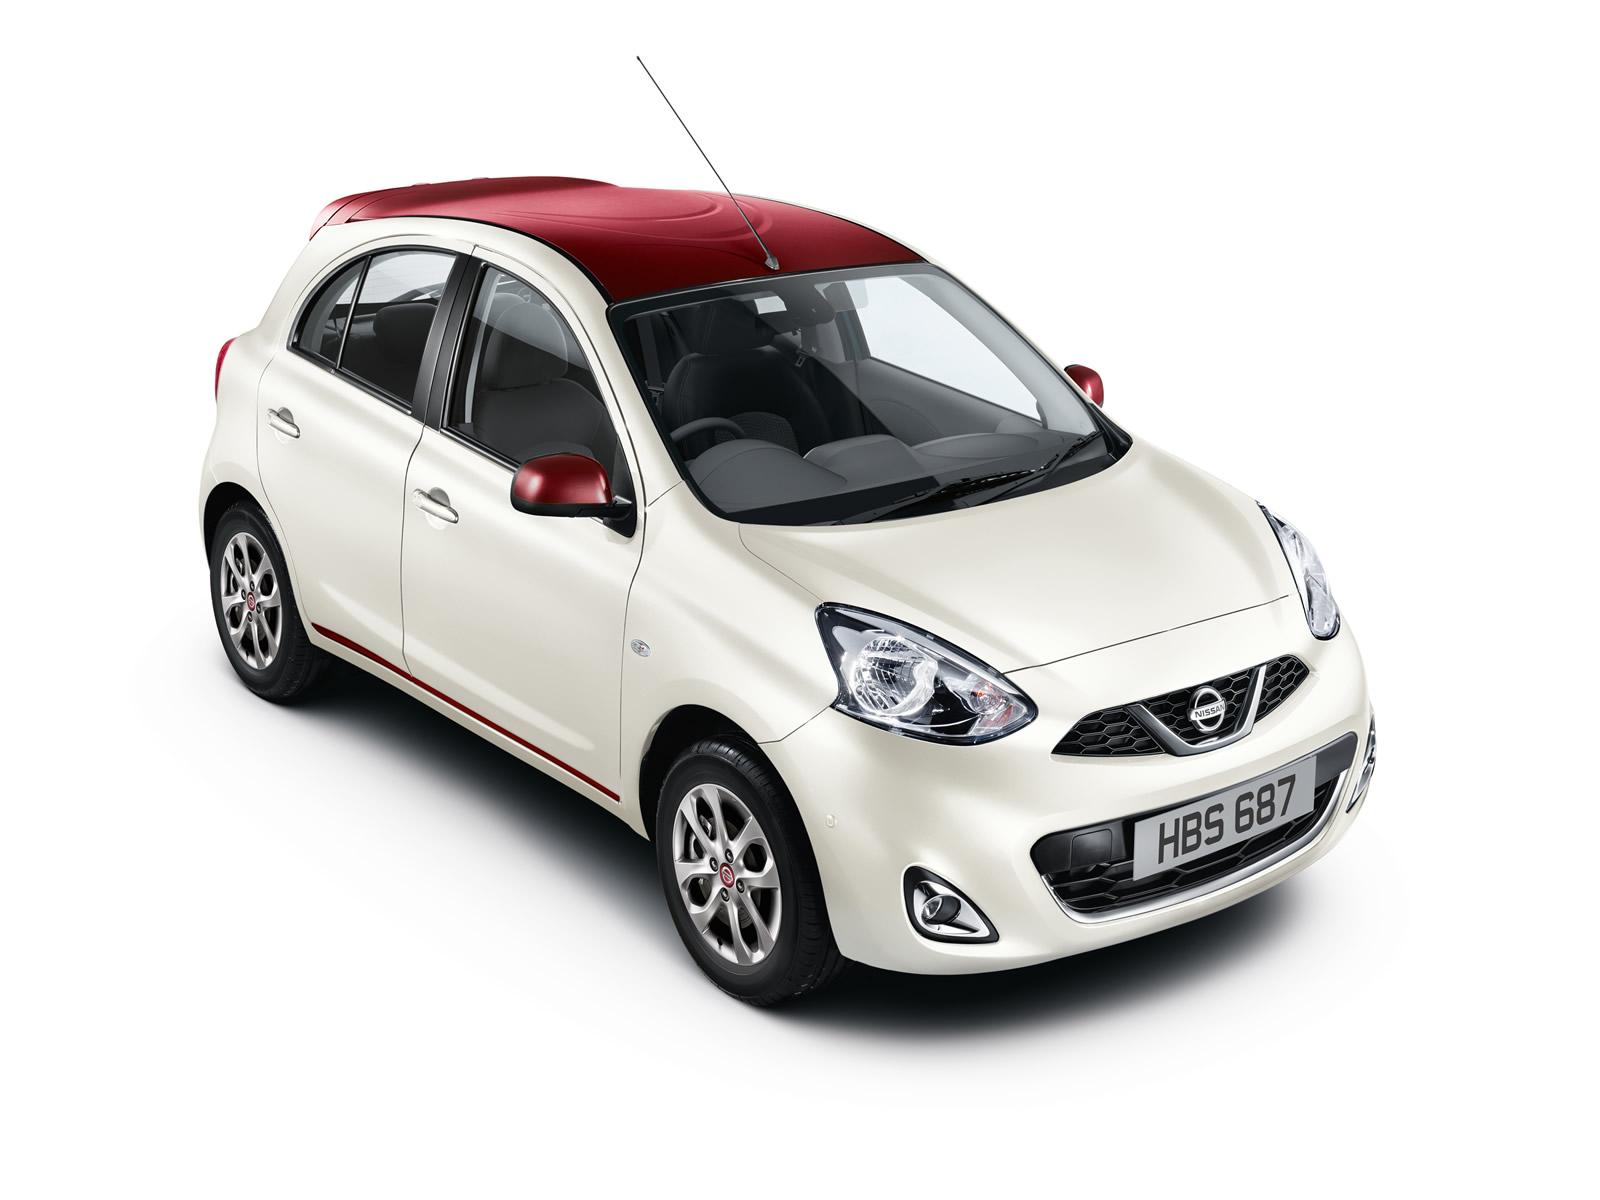 Next gen Nissan Micra for India to launch in 2016